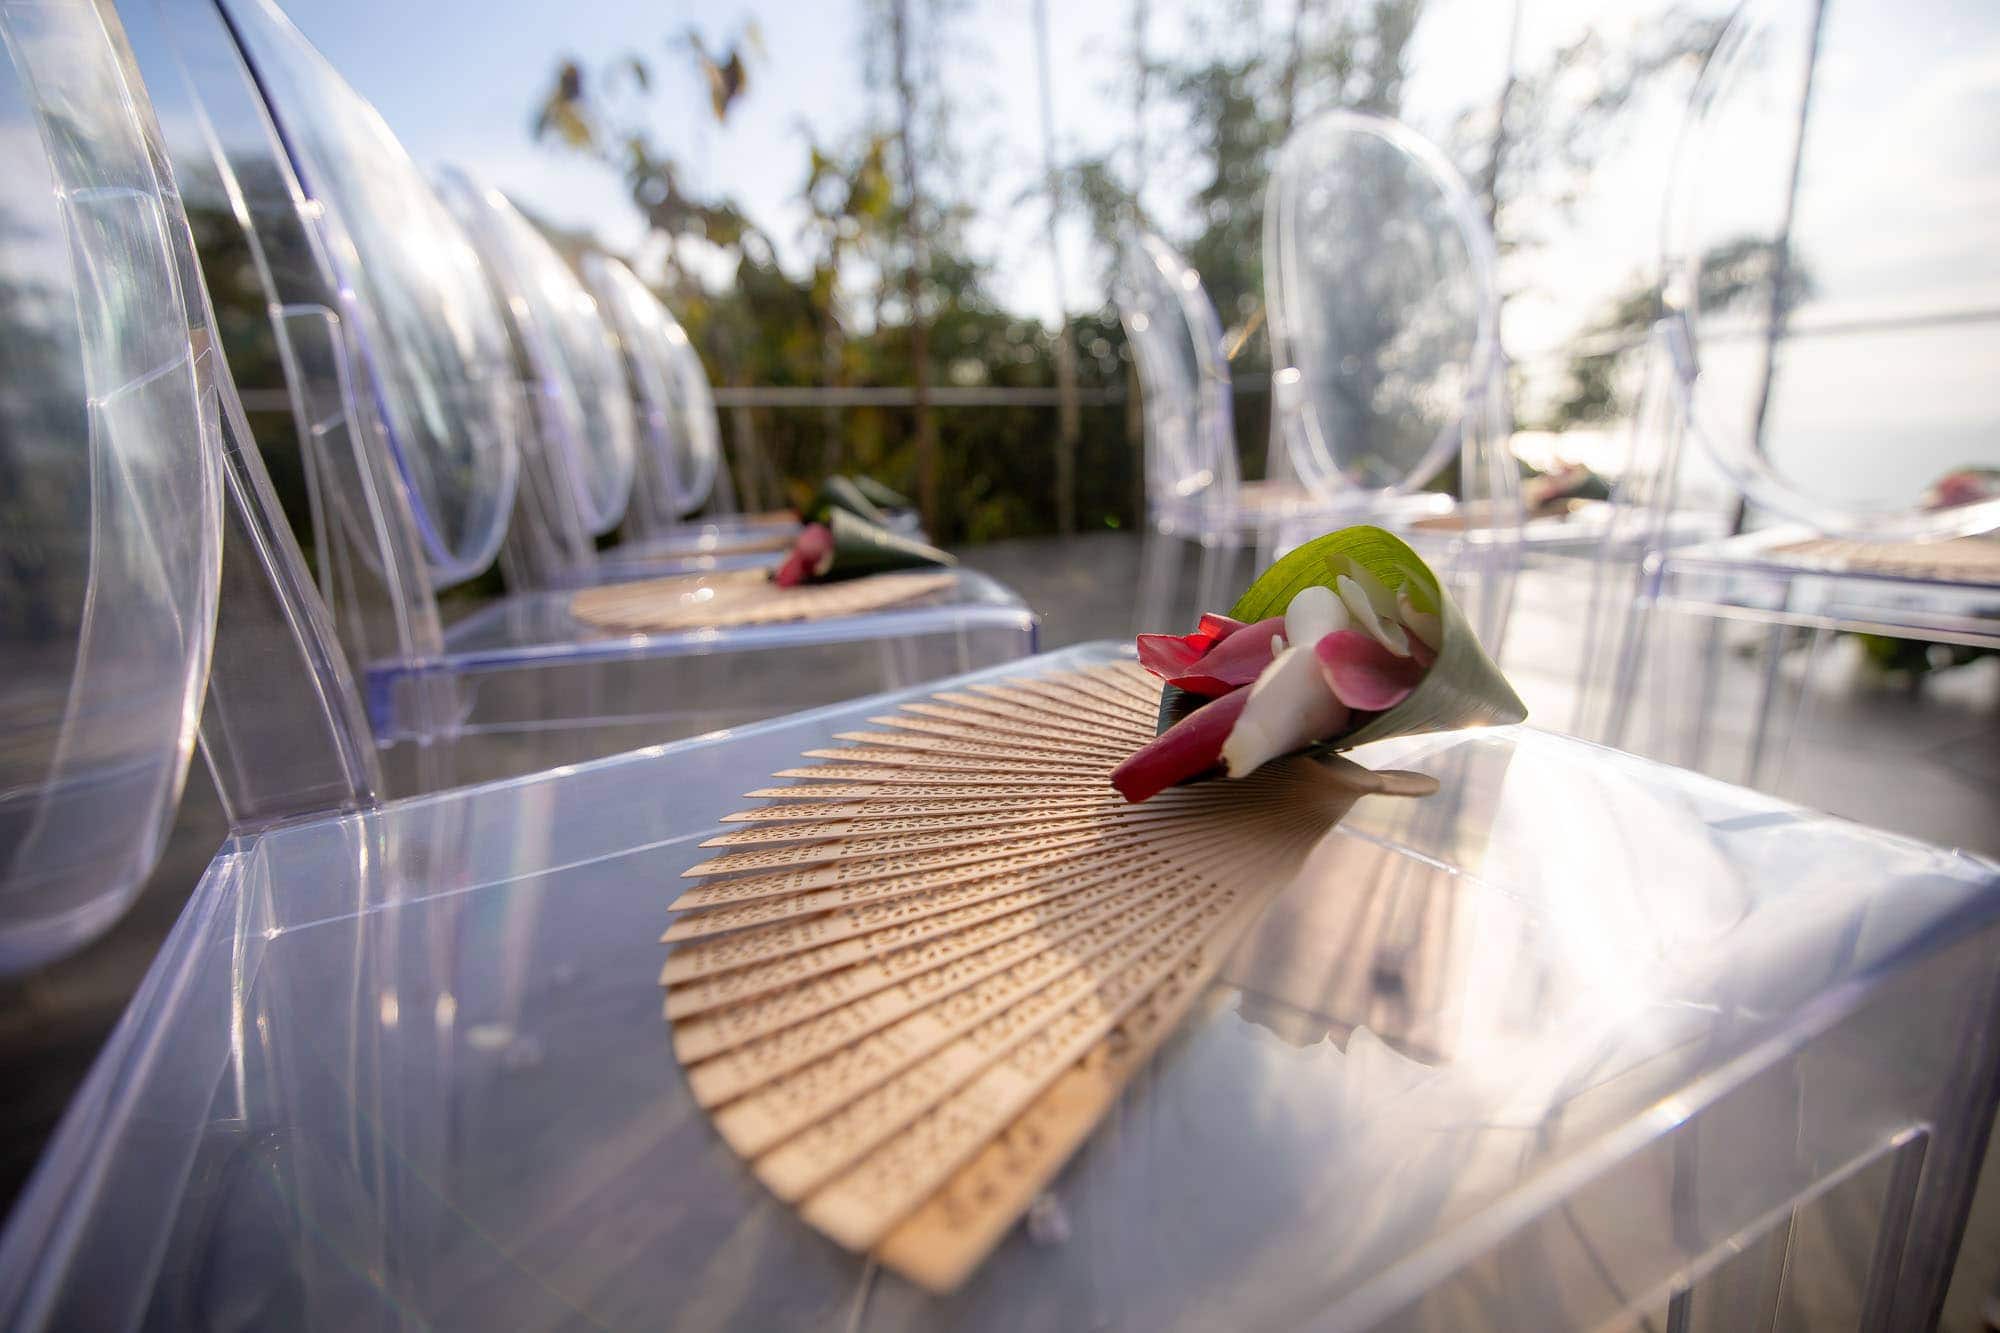 easy way to plan a wedding in Costa Rica: let the professionals add flowers and fans to the guests' chairs